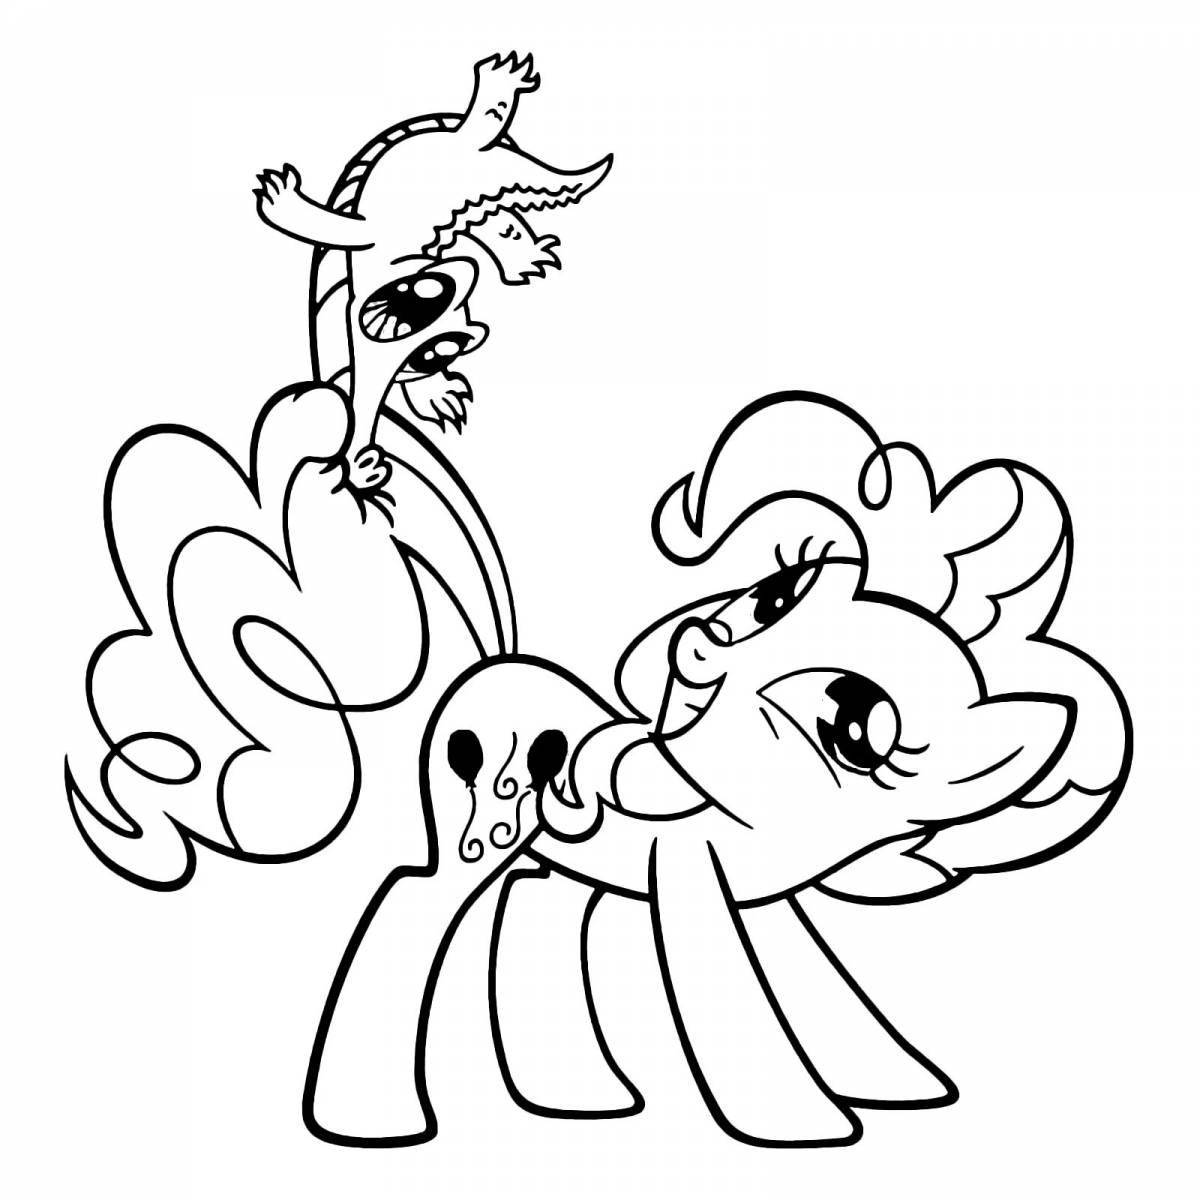 Exotic ponies coloring page